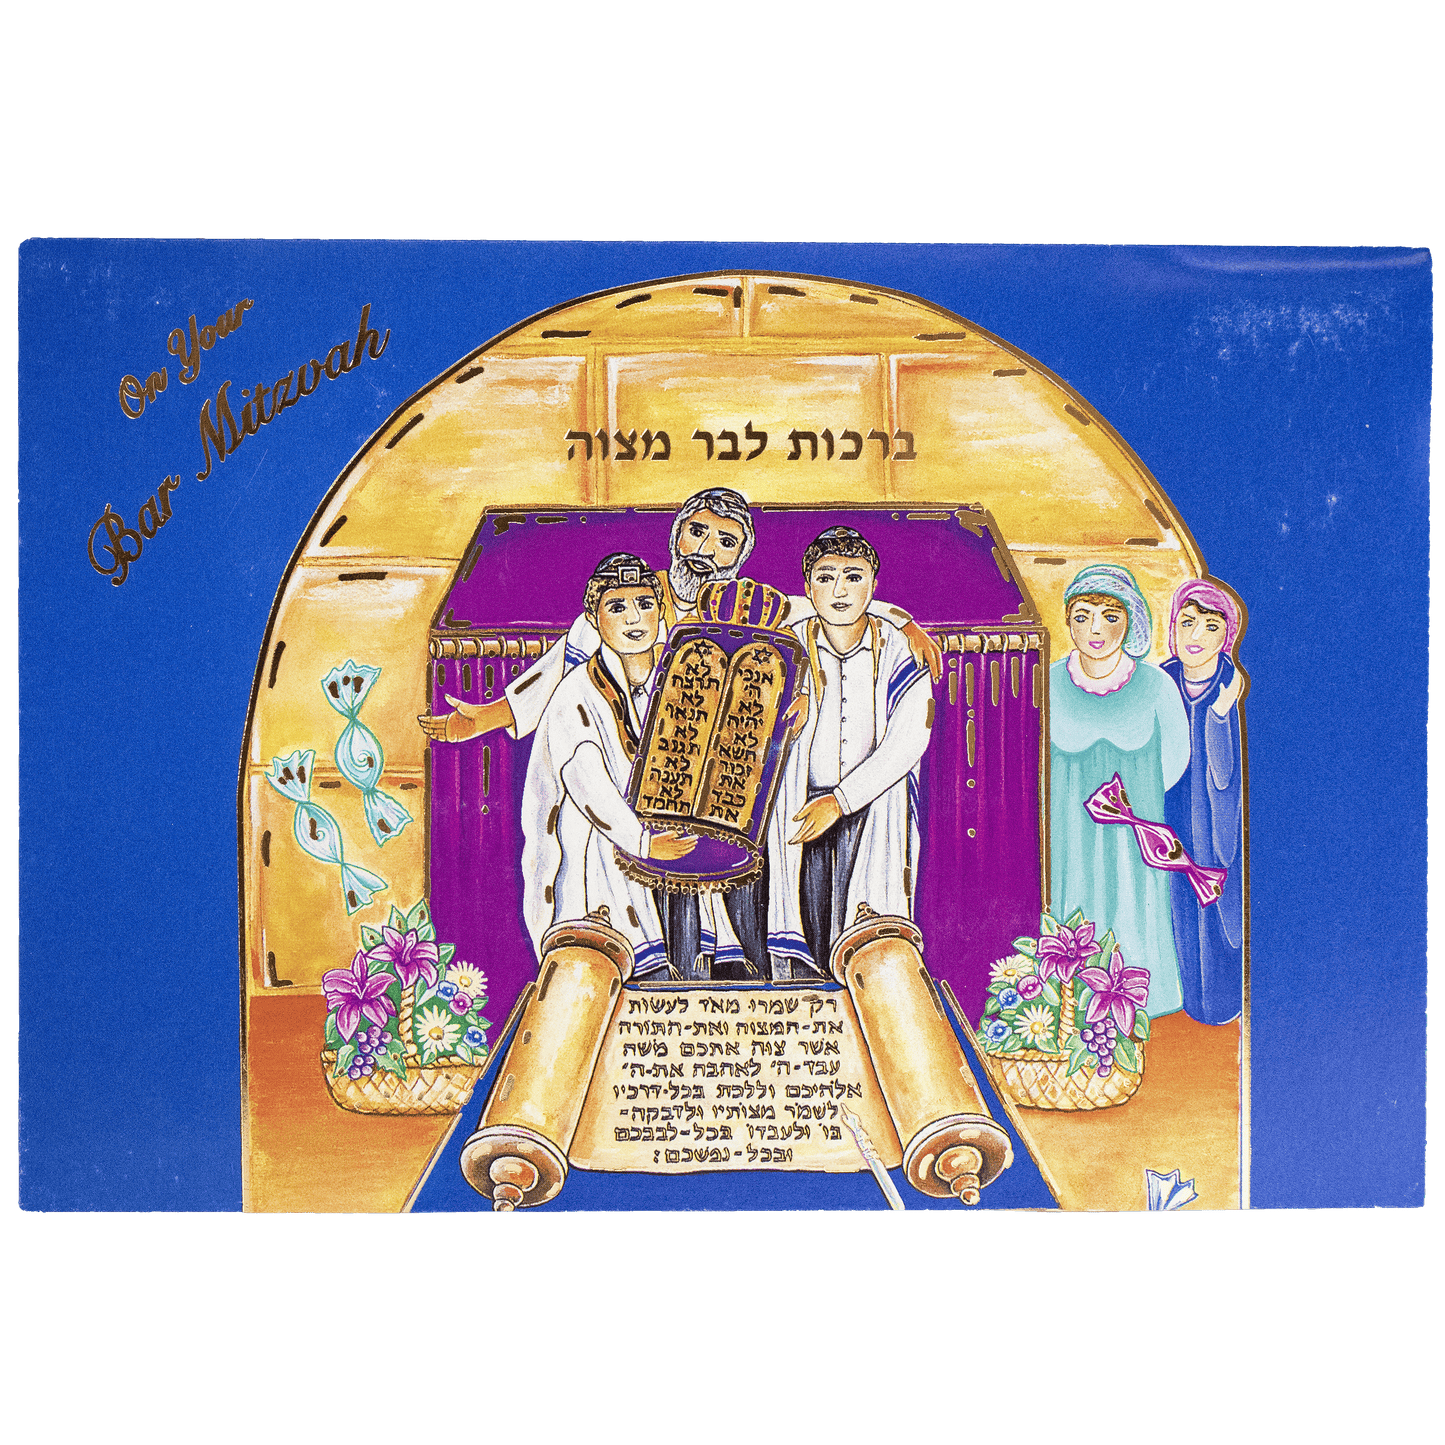 Pop-up card perfect for a Bar Mitzvah with gold outlining the ceremonial image